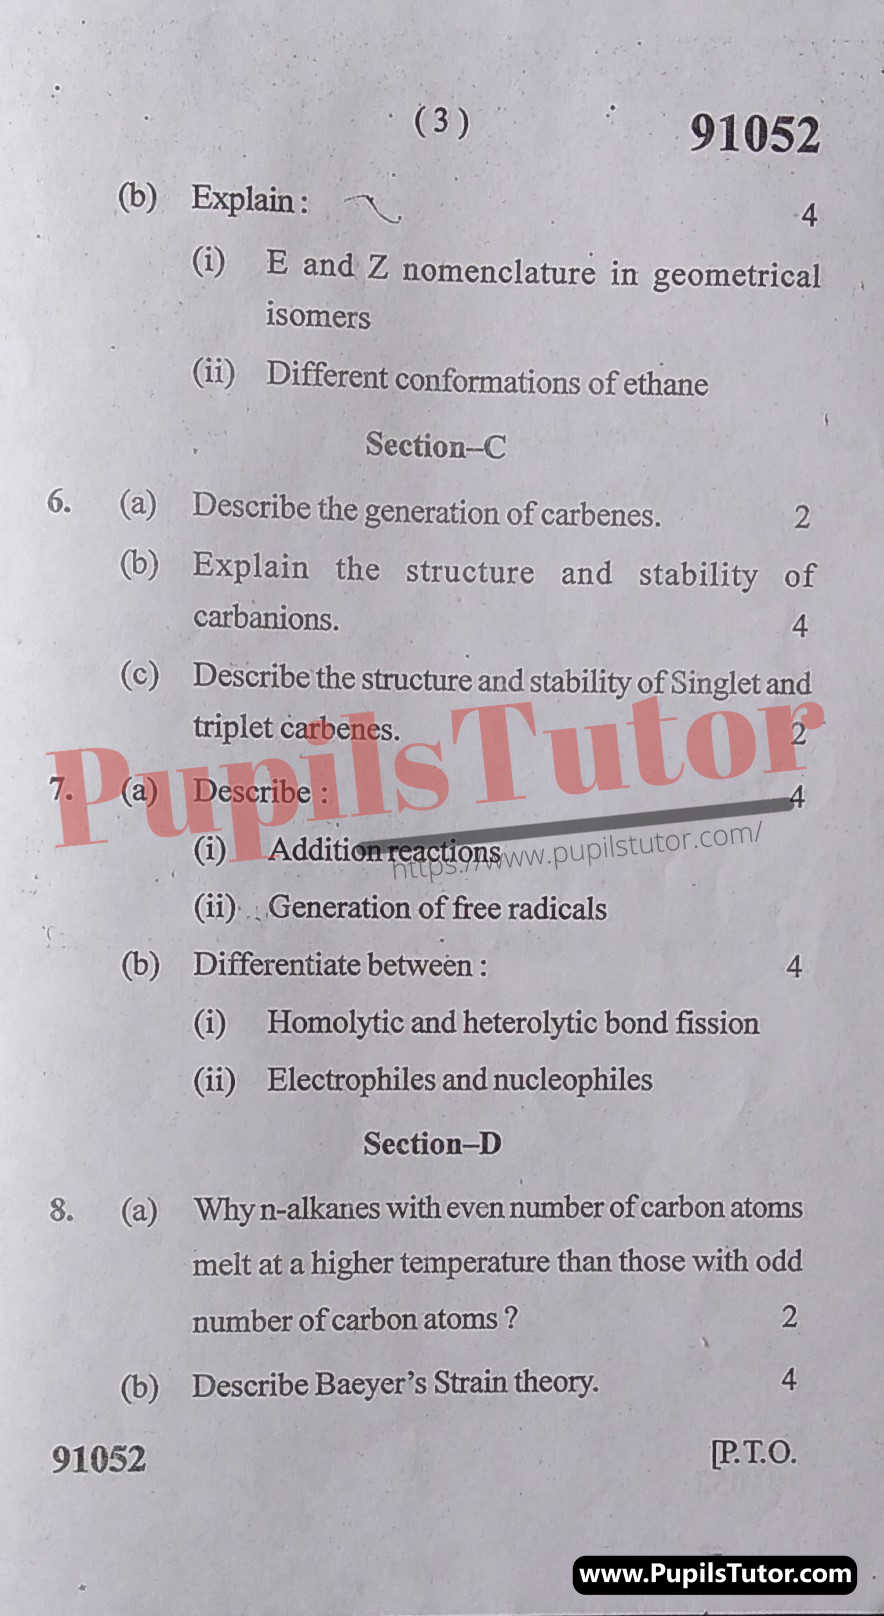 Free Download PDF Of M.D. University B.Sc. [Bio-Technology] First Semester Latest Question Paper For Organic Chemistry Subject (Page 3) - https://www.pupilstutor.com